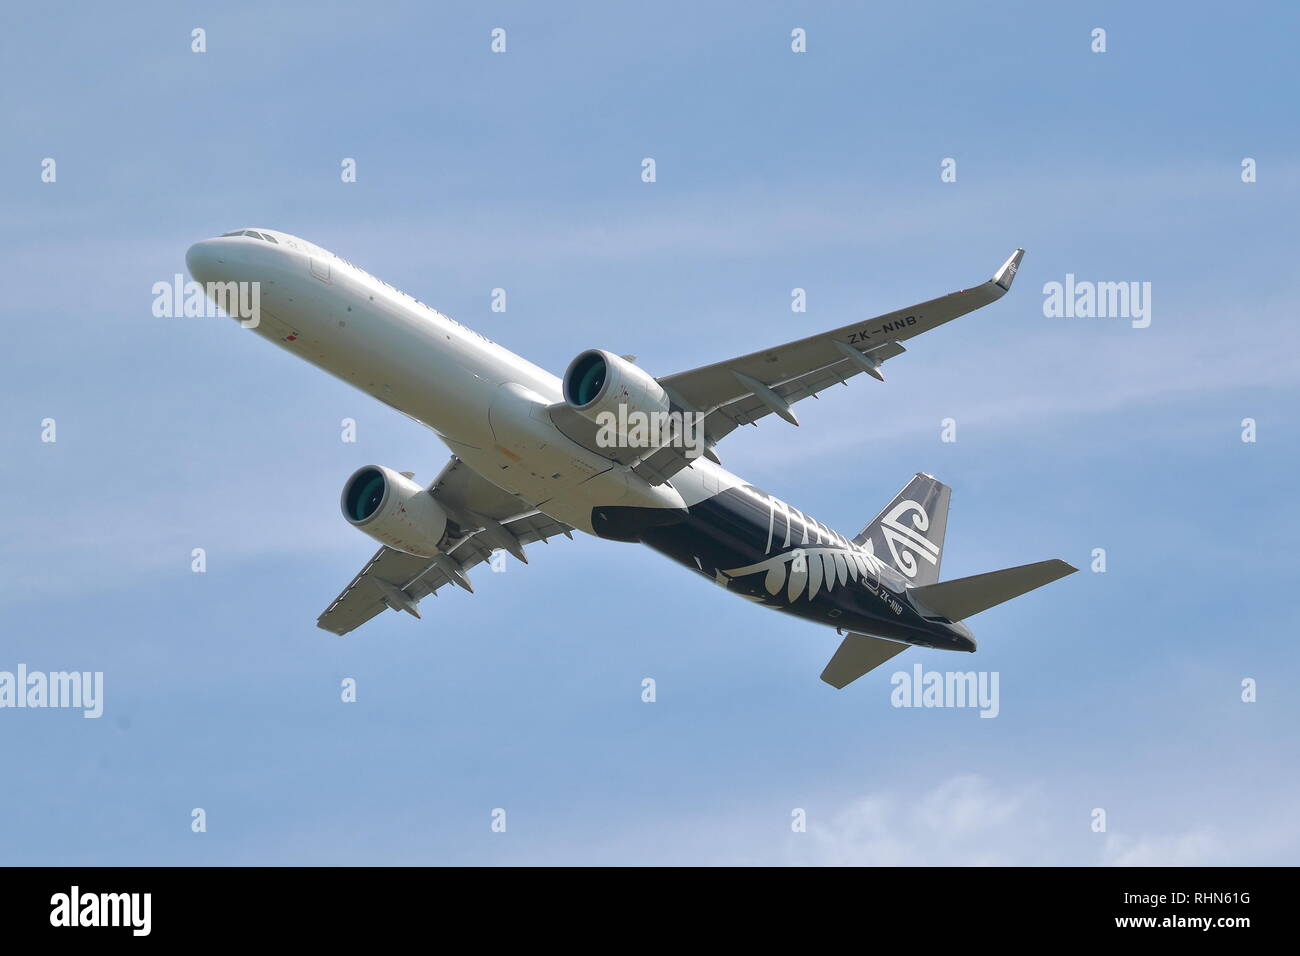 Air New Zealand Airbus A321 taking off from Auckland Airport, New Zealand Stock Photo